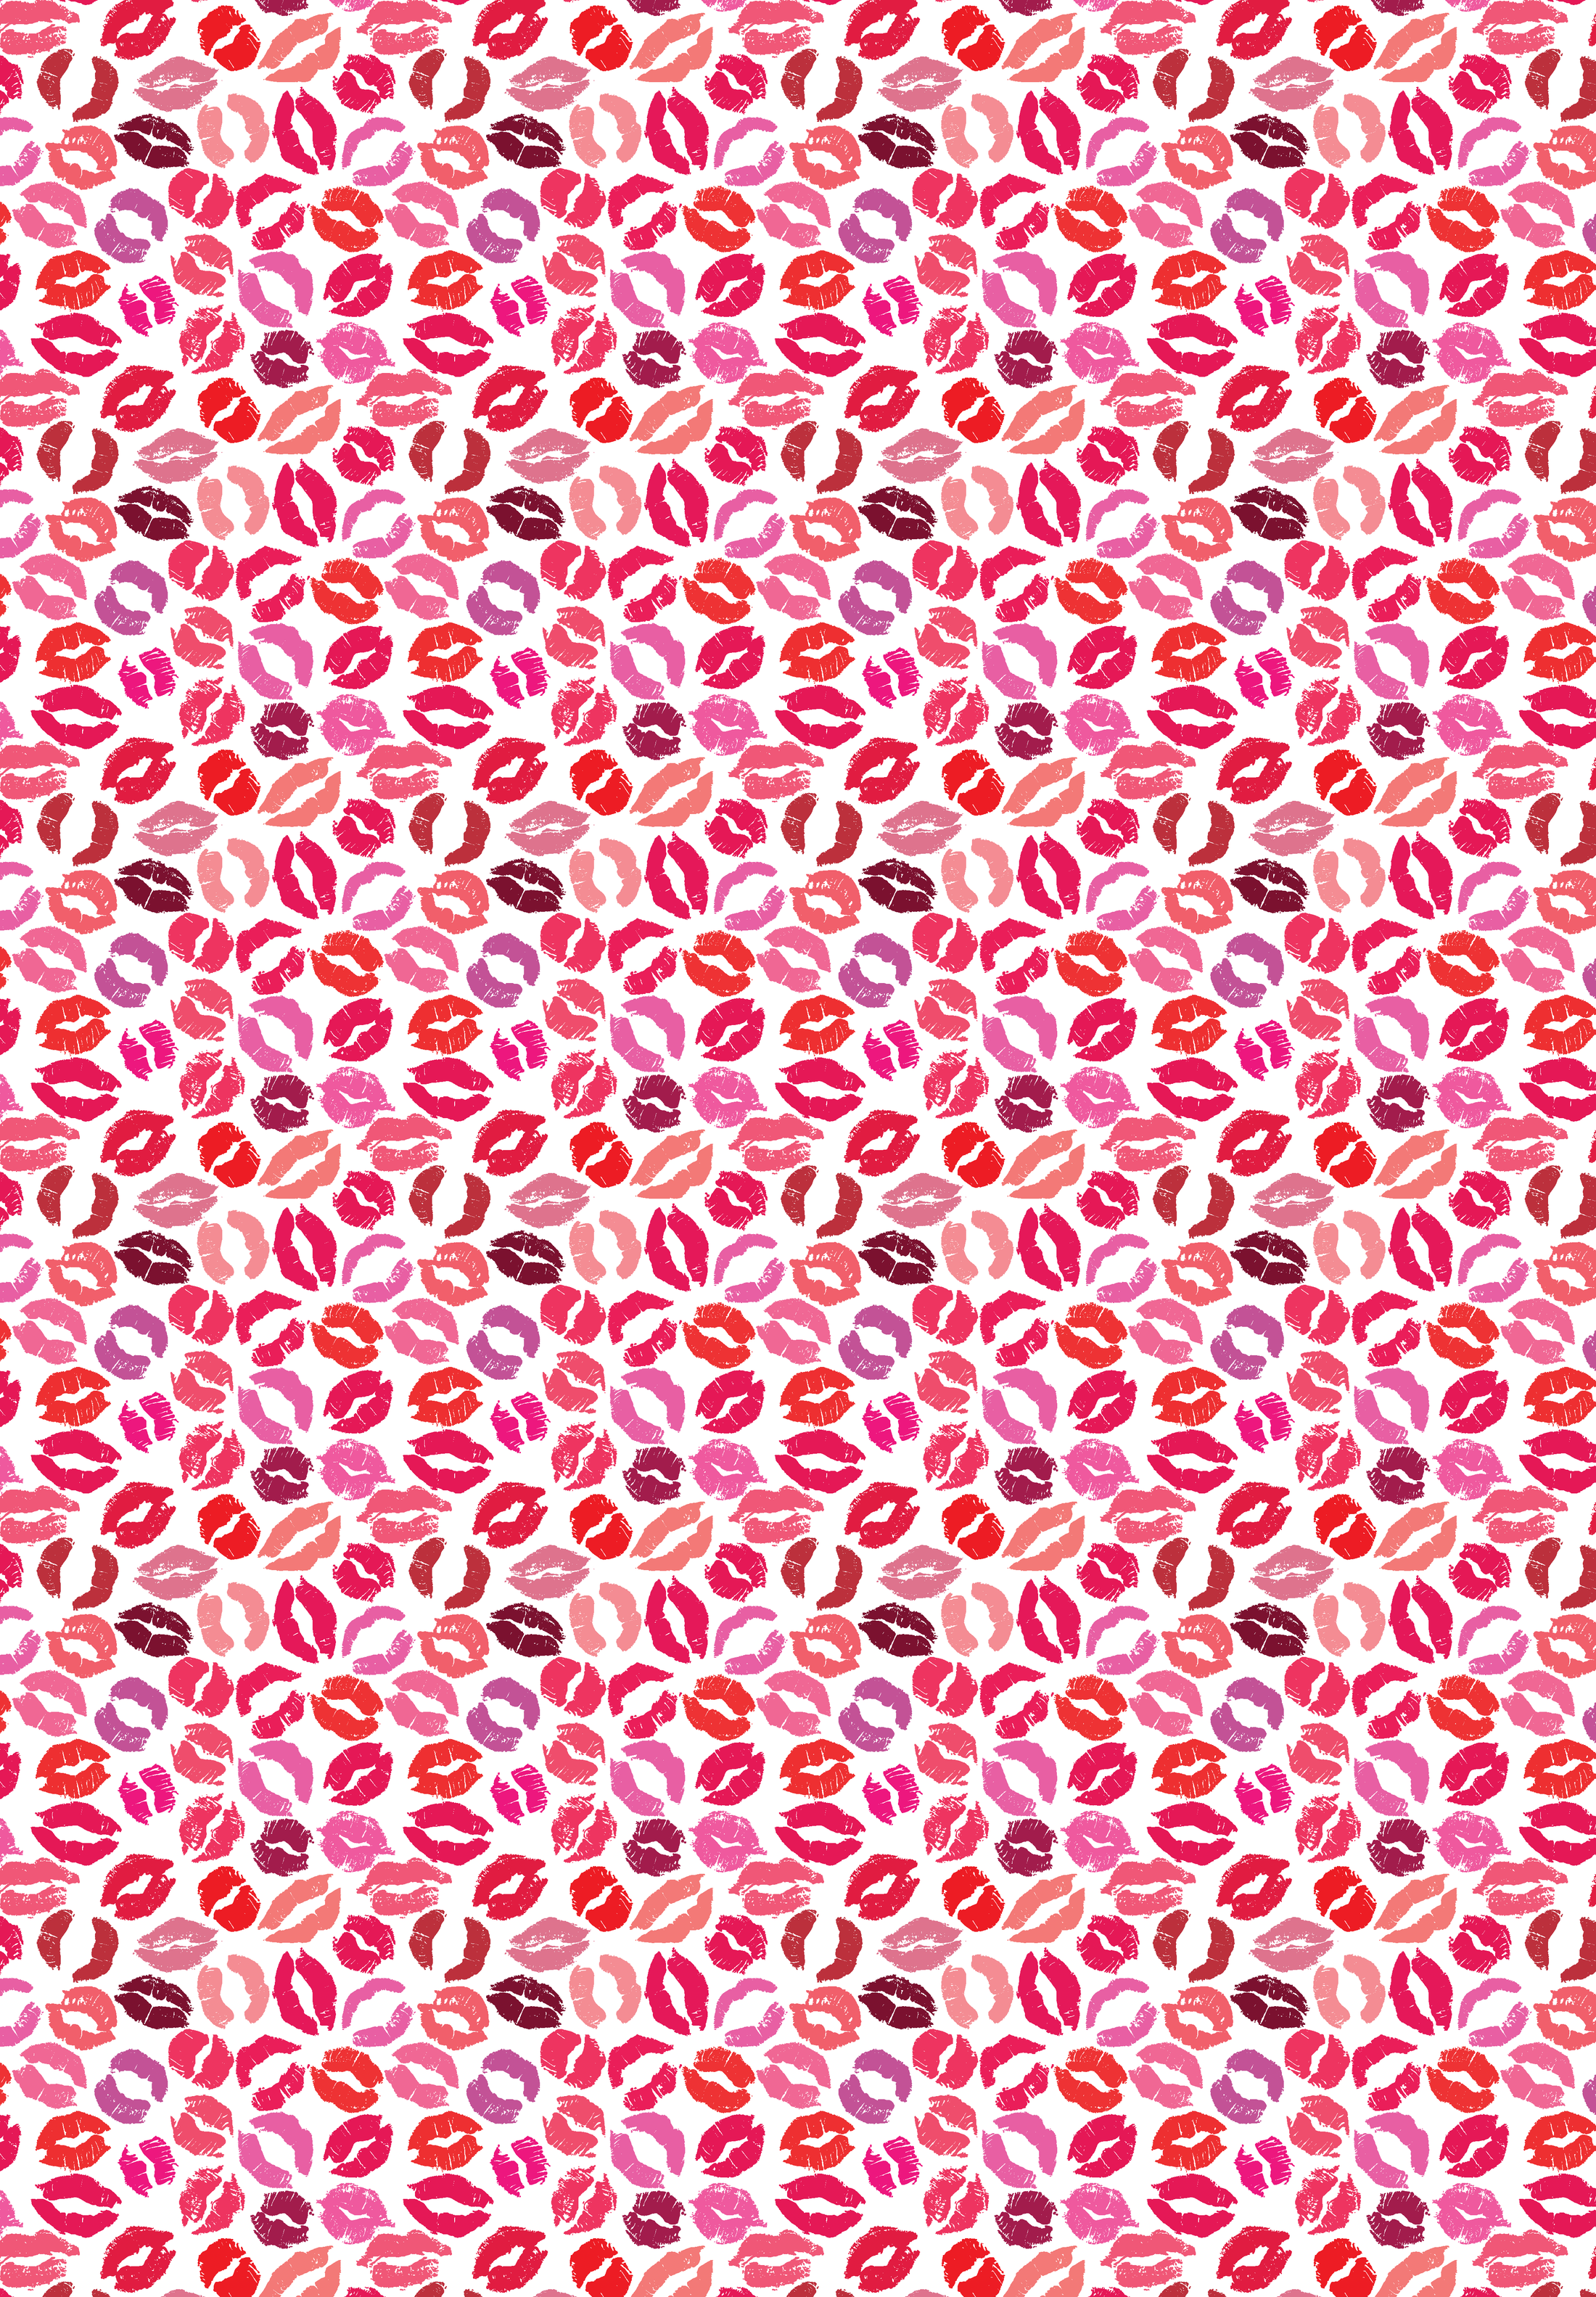 Lipstick Kisses Wrapping Paper